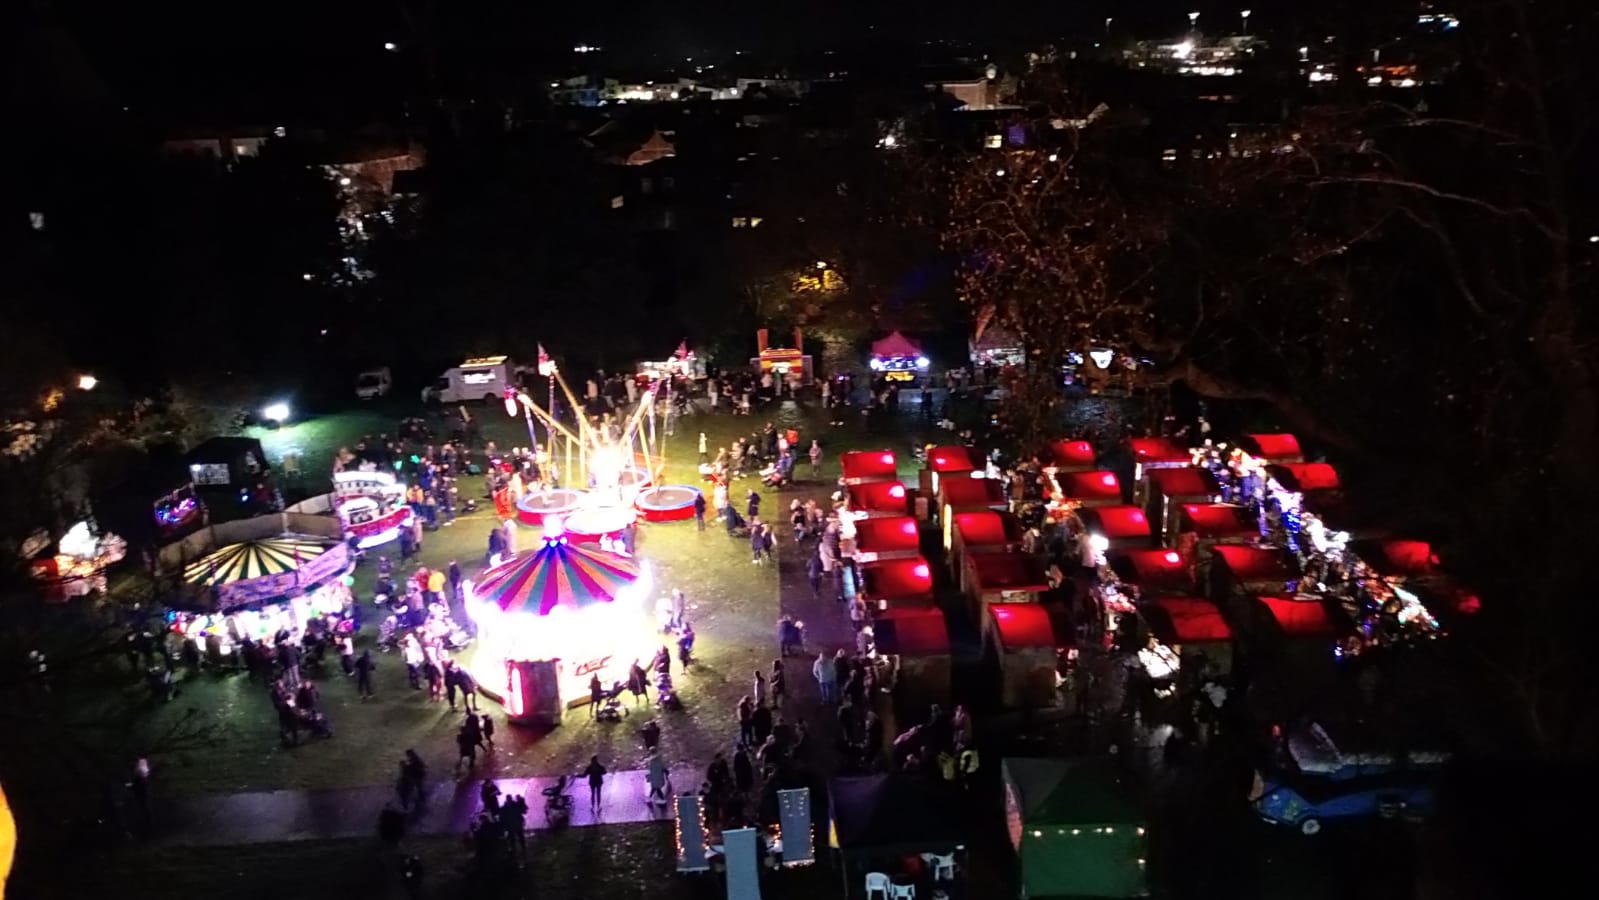 An arial shot of a Christmas market, with funfair rides and chalets